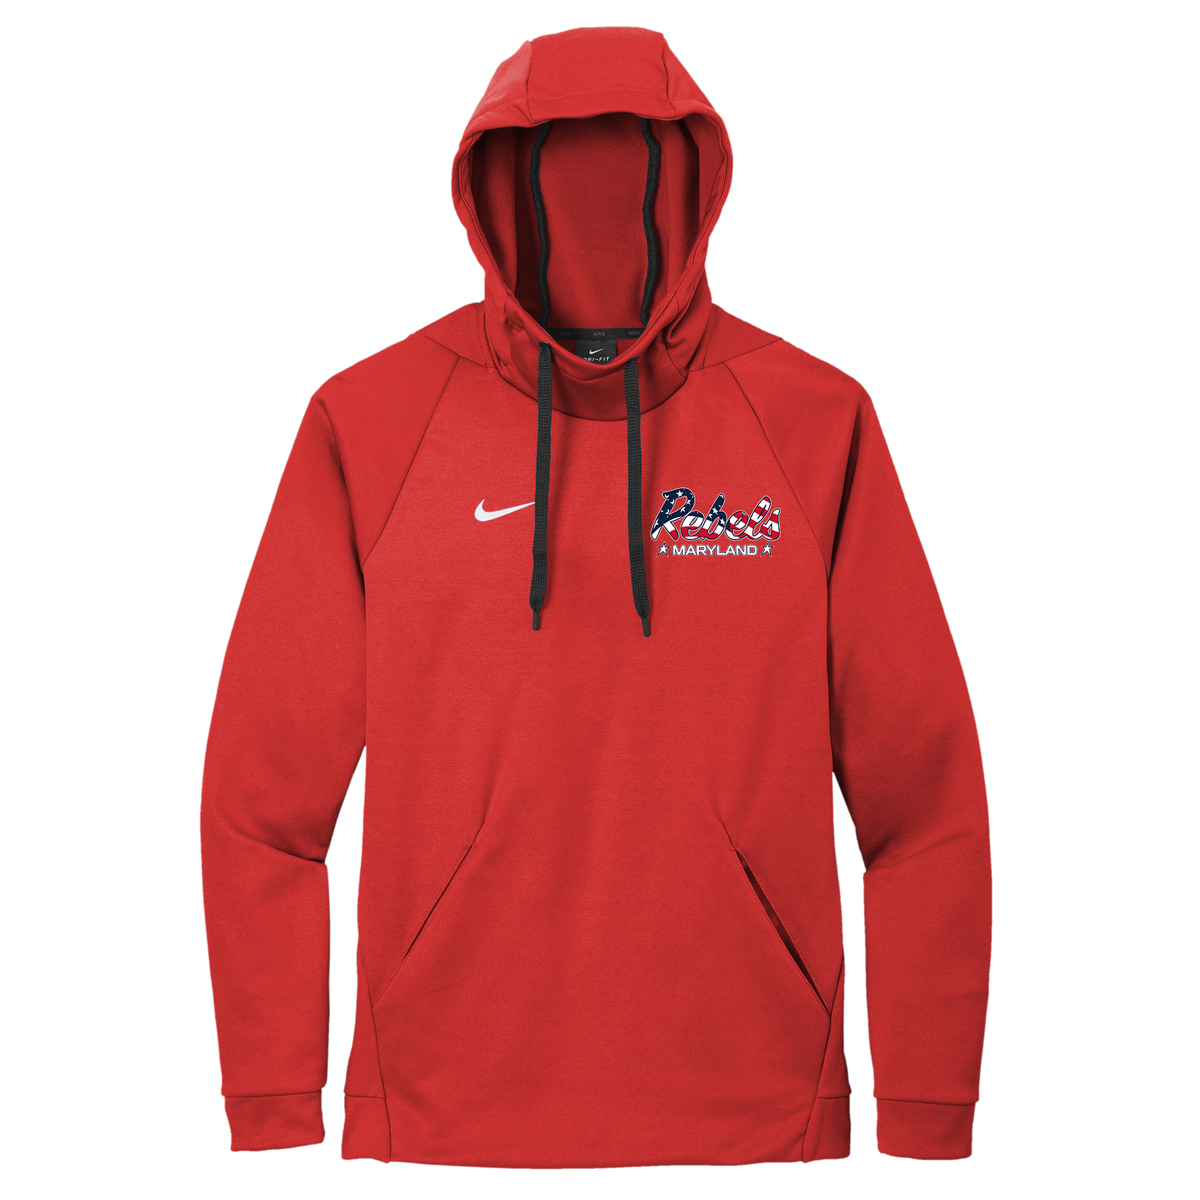 Rebels Maryland Nike Therma-FIT Embroidered Hoodie